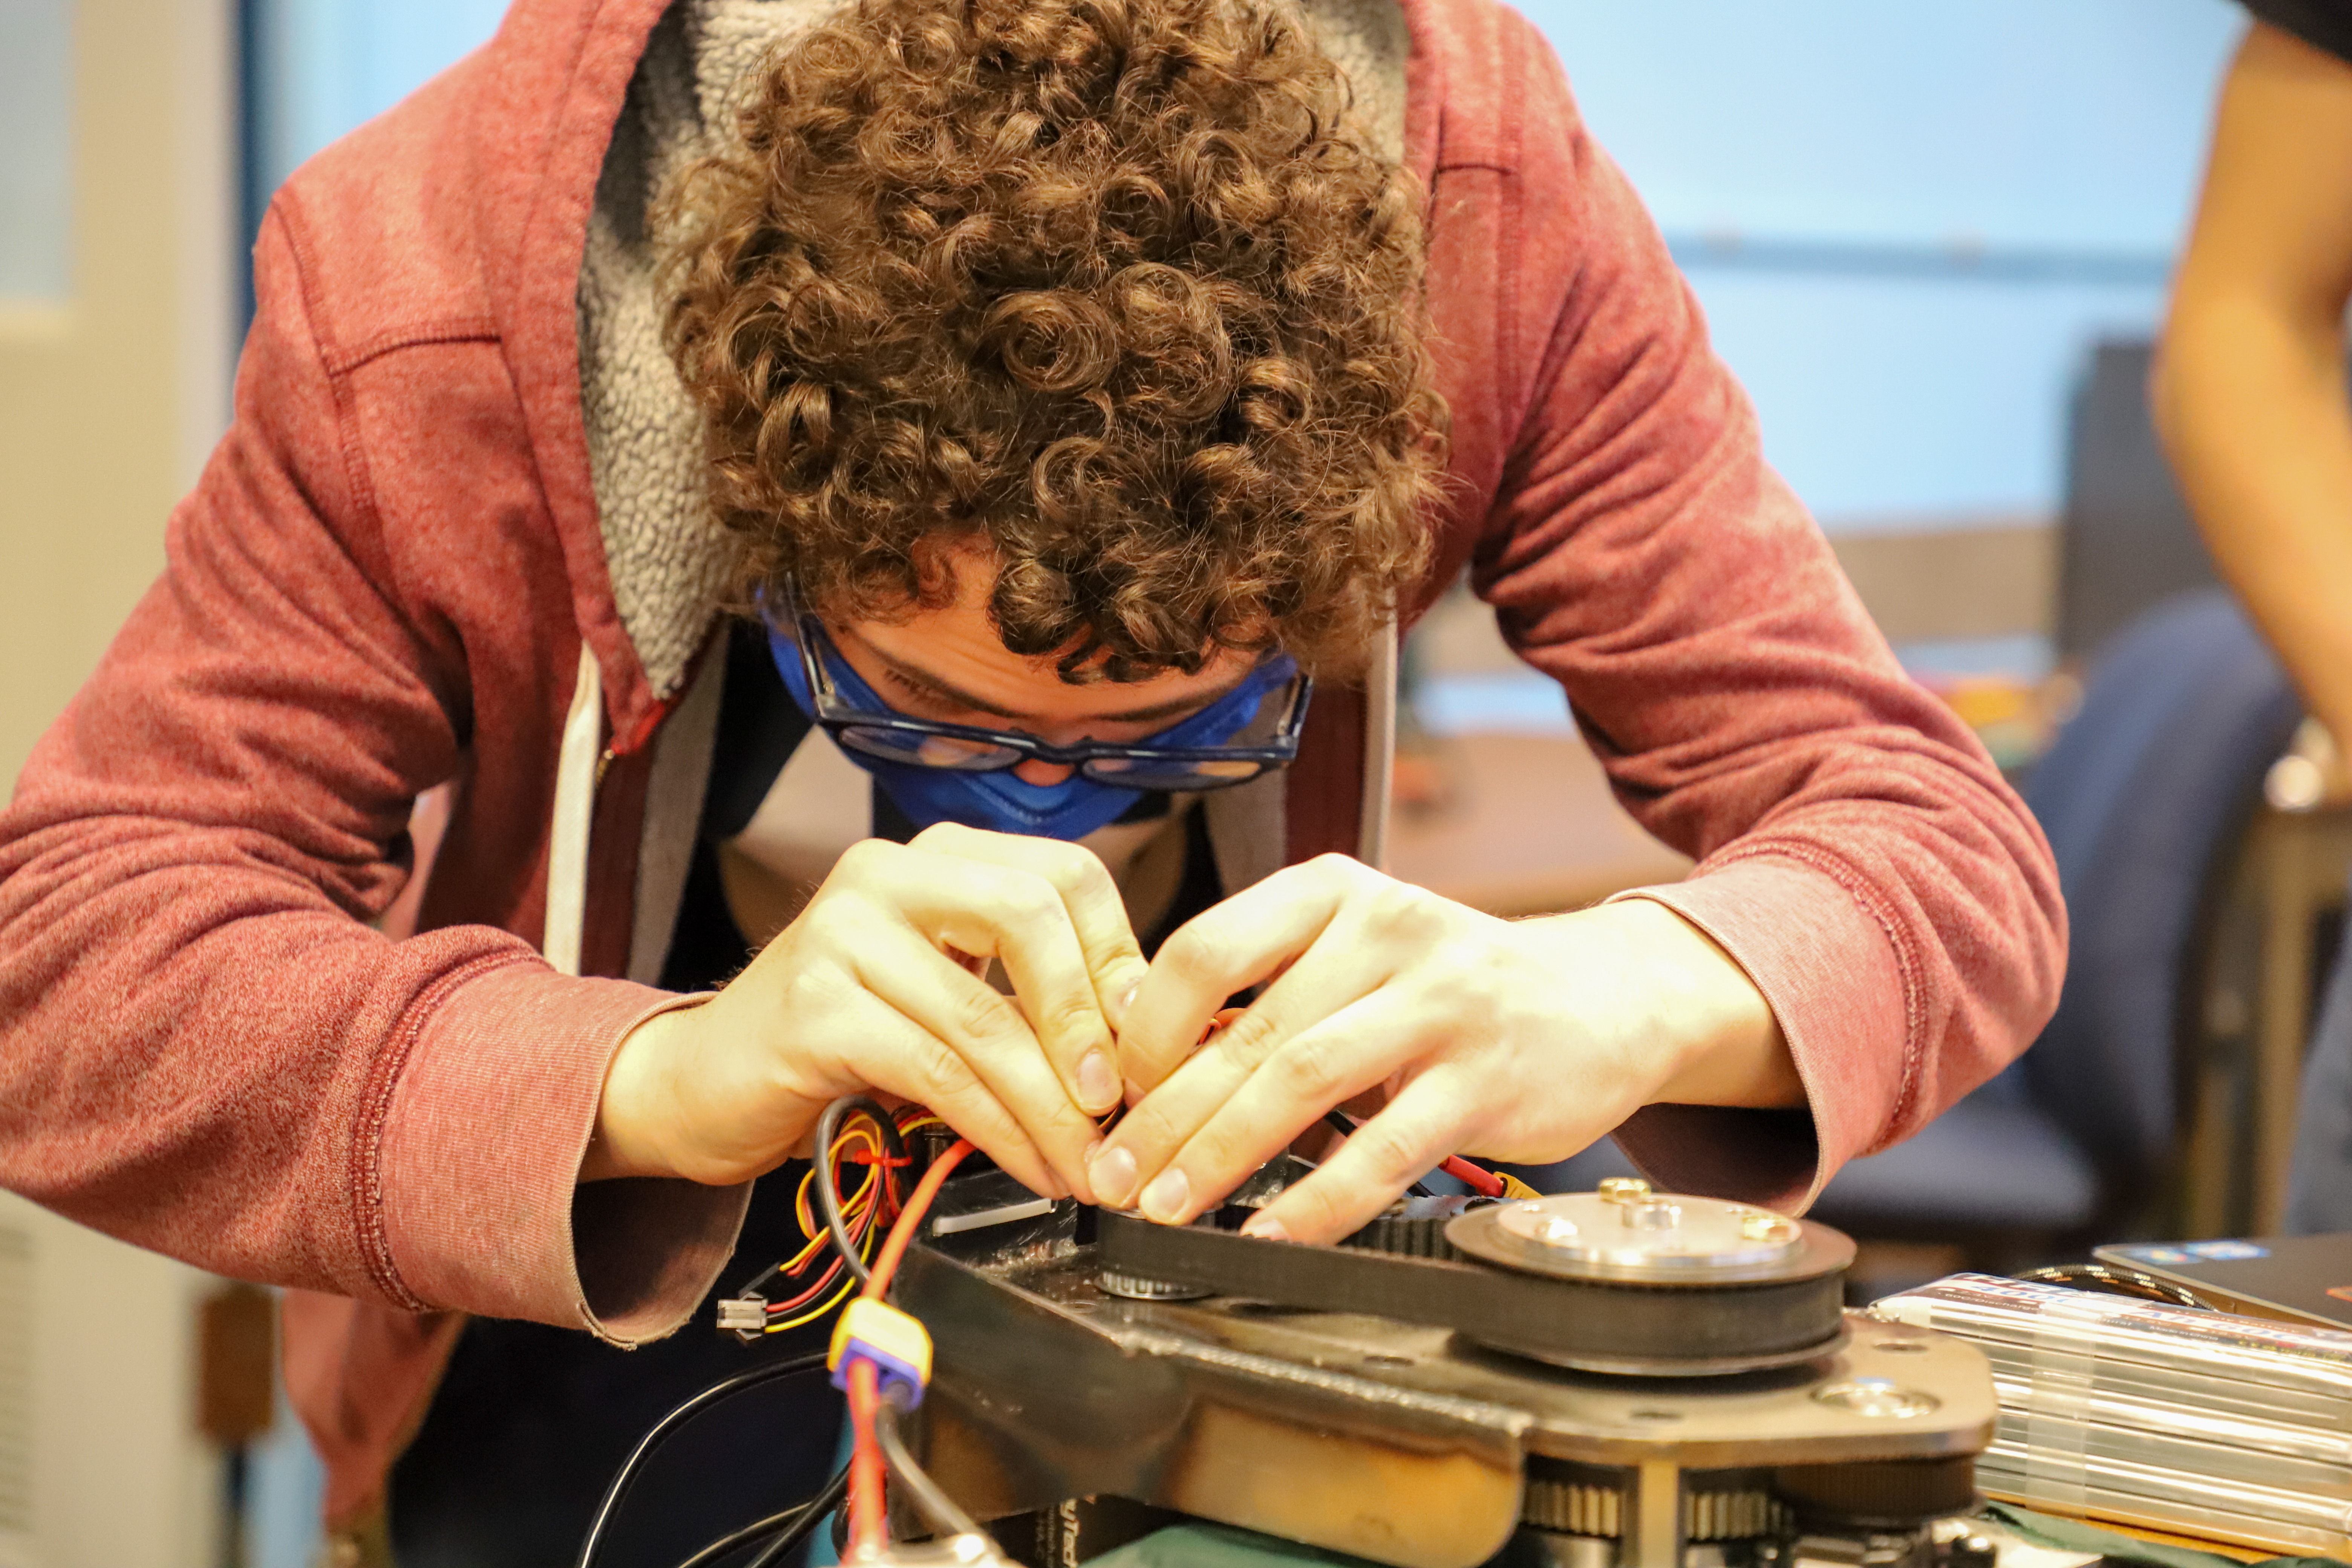 A Kettering University student works on the wiring of the robot's wheel.